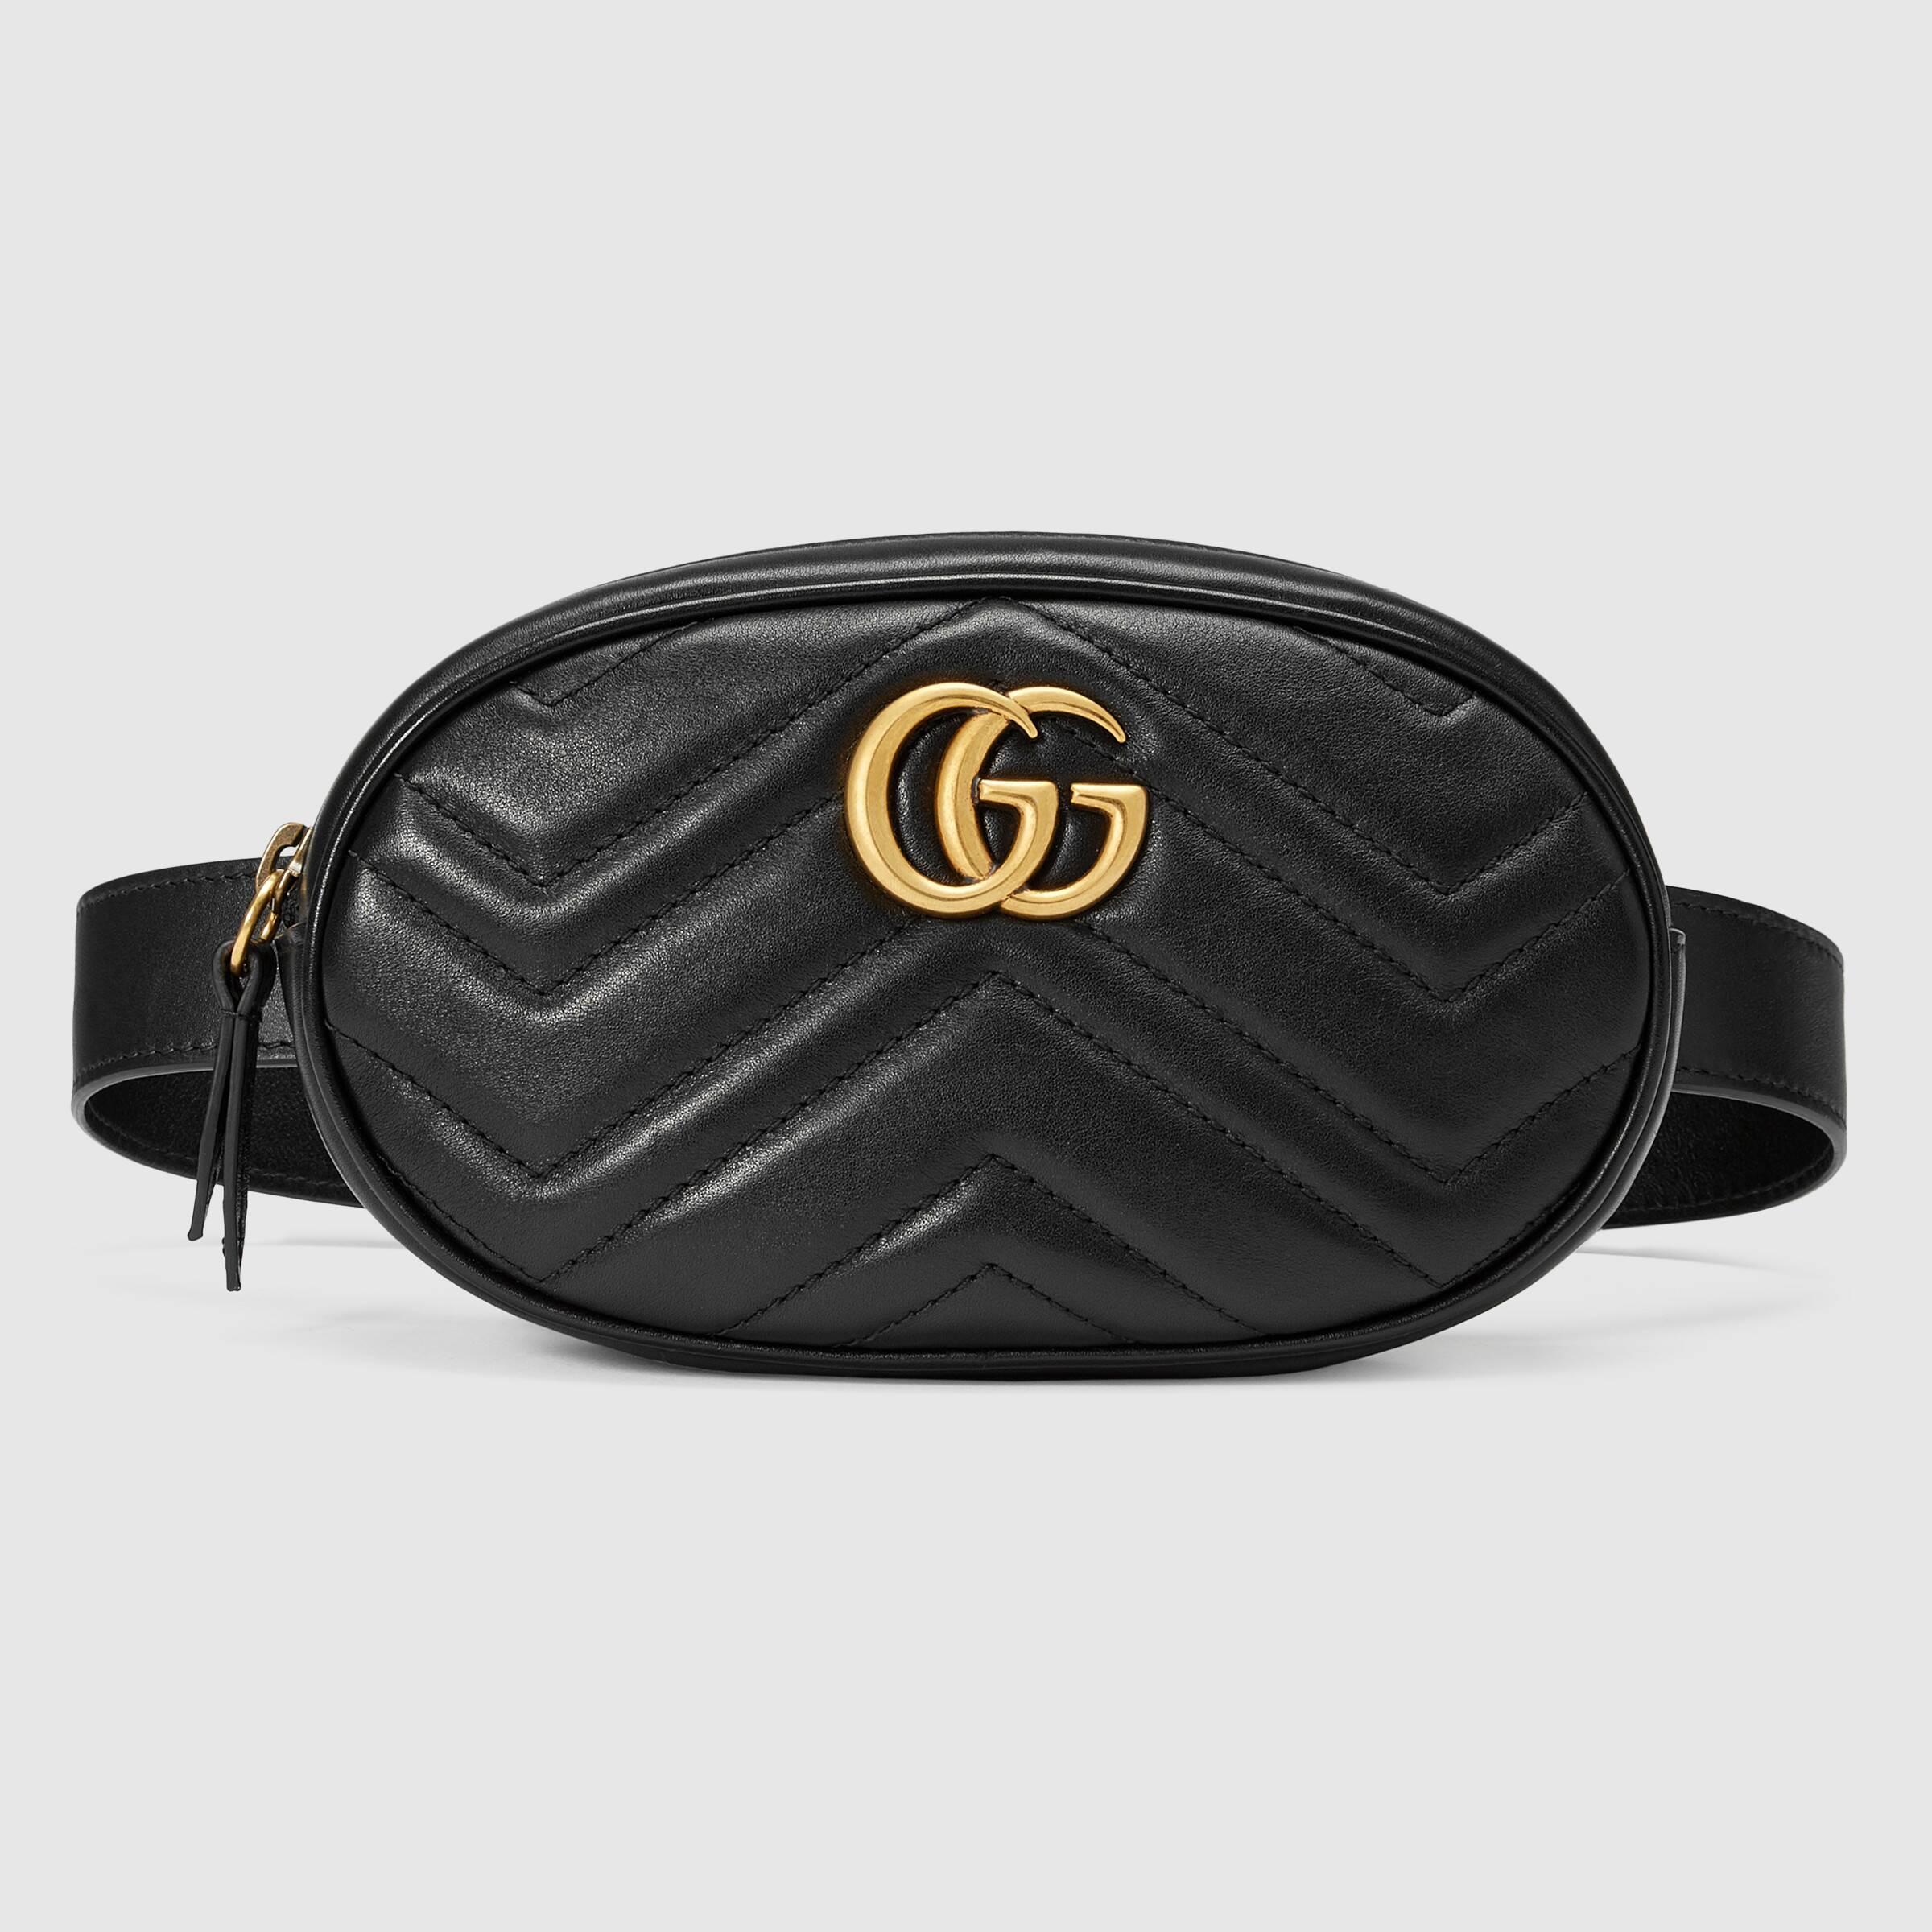 Gucci GG Marmont Small Matelasse Leather Belt Bag in Nero (Black) - Save 32% - Lyst